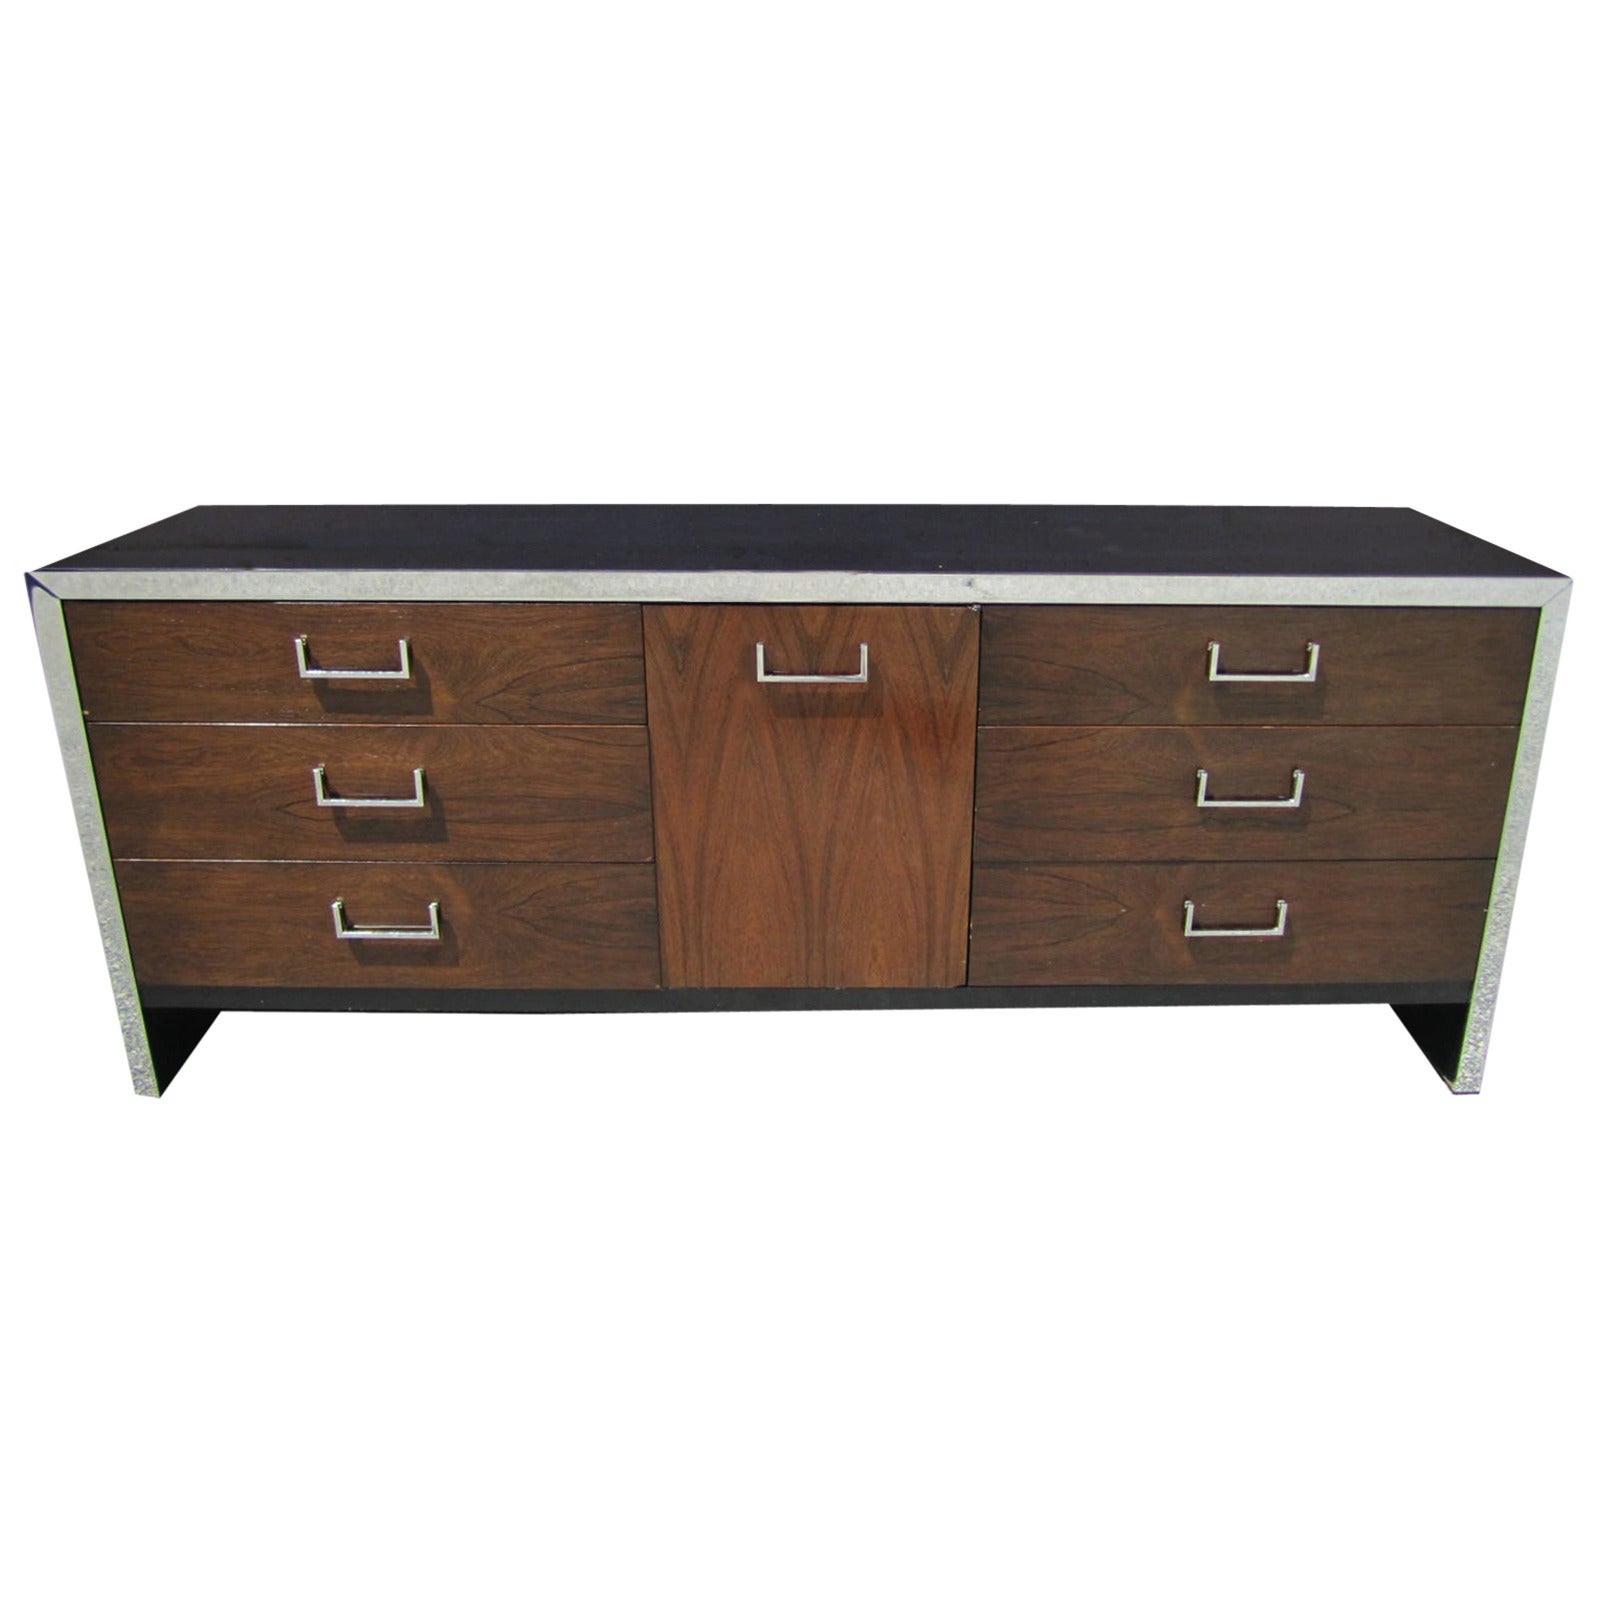 Milo Baughman Style Black Lacquer and Rosewood Dresser, Mid-Century Modern For Sale